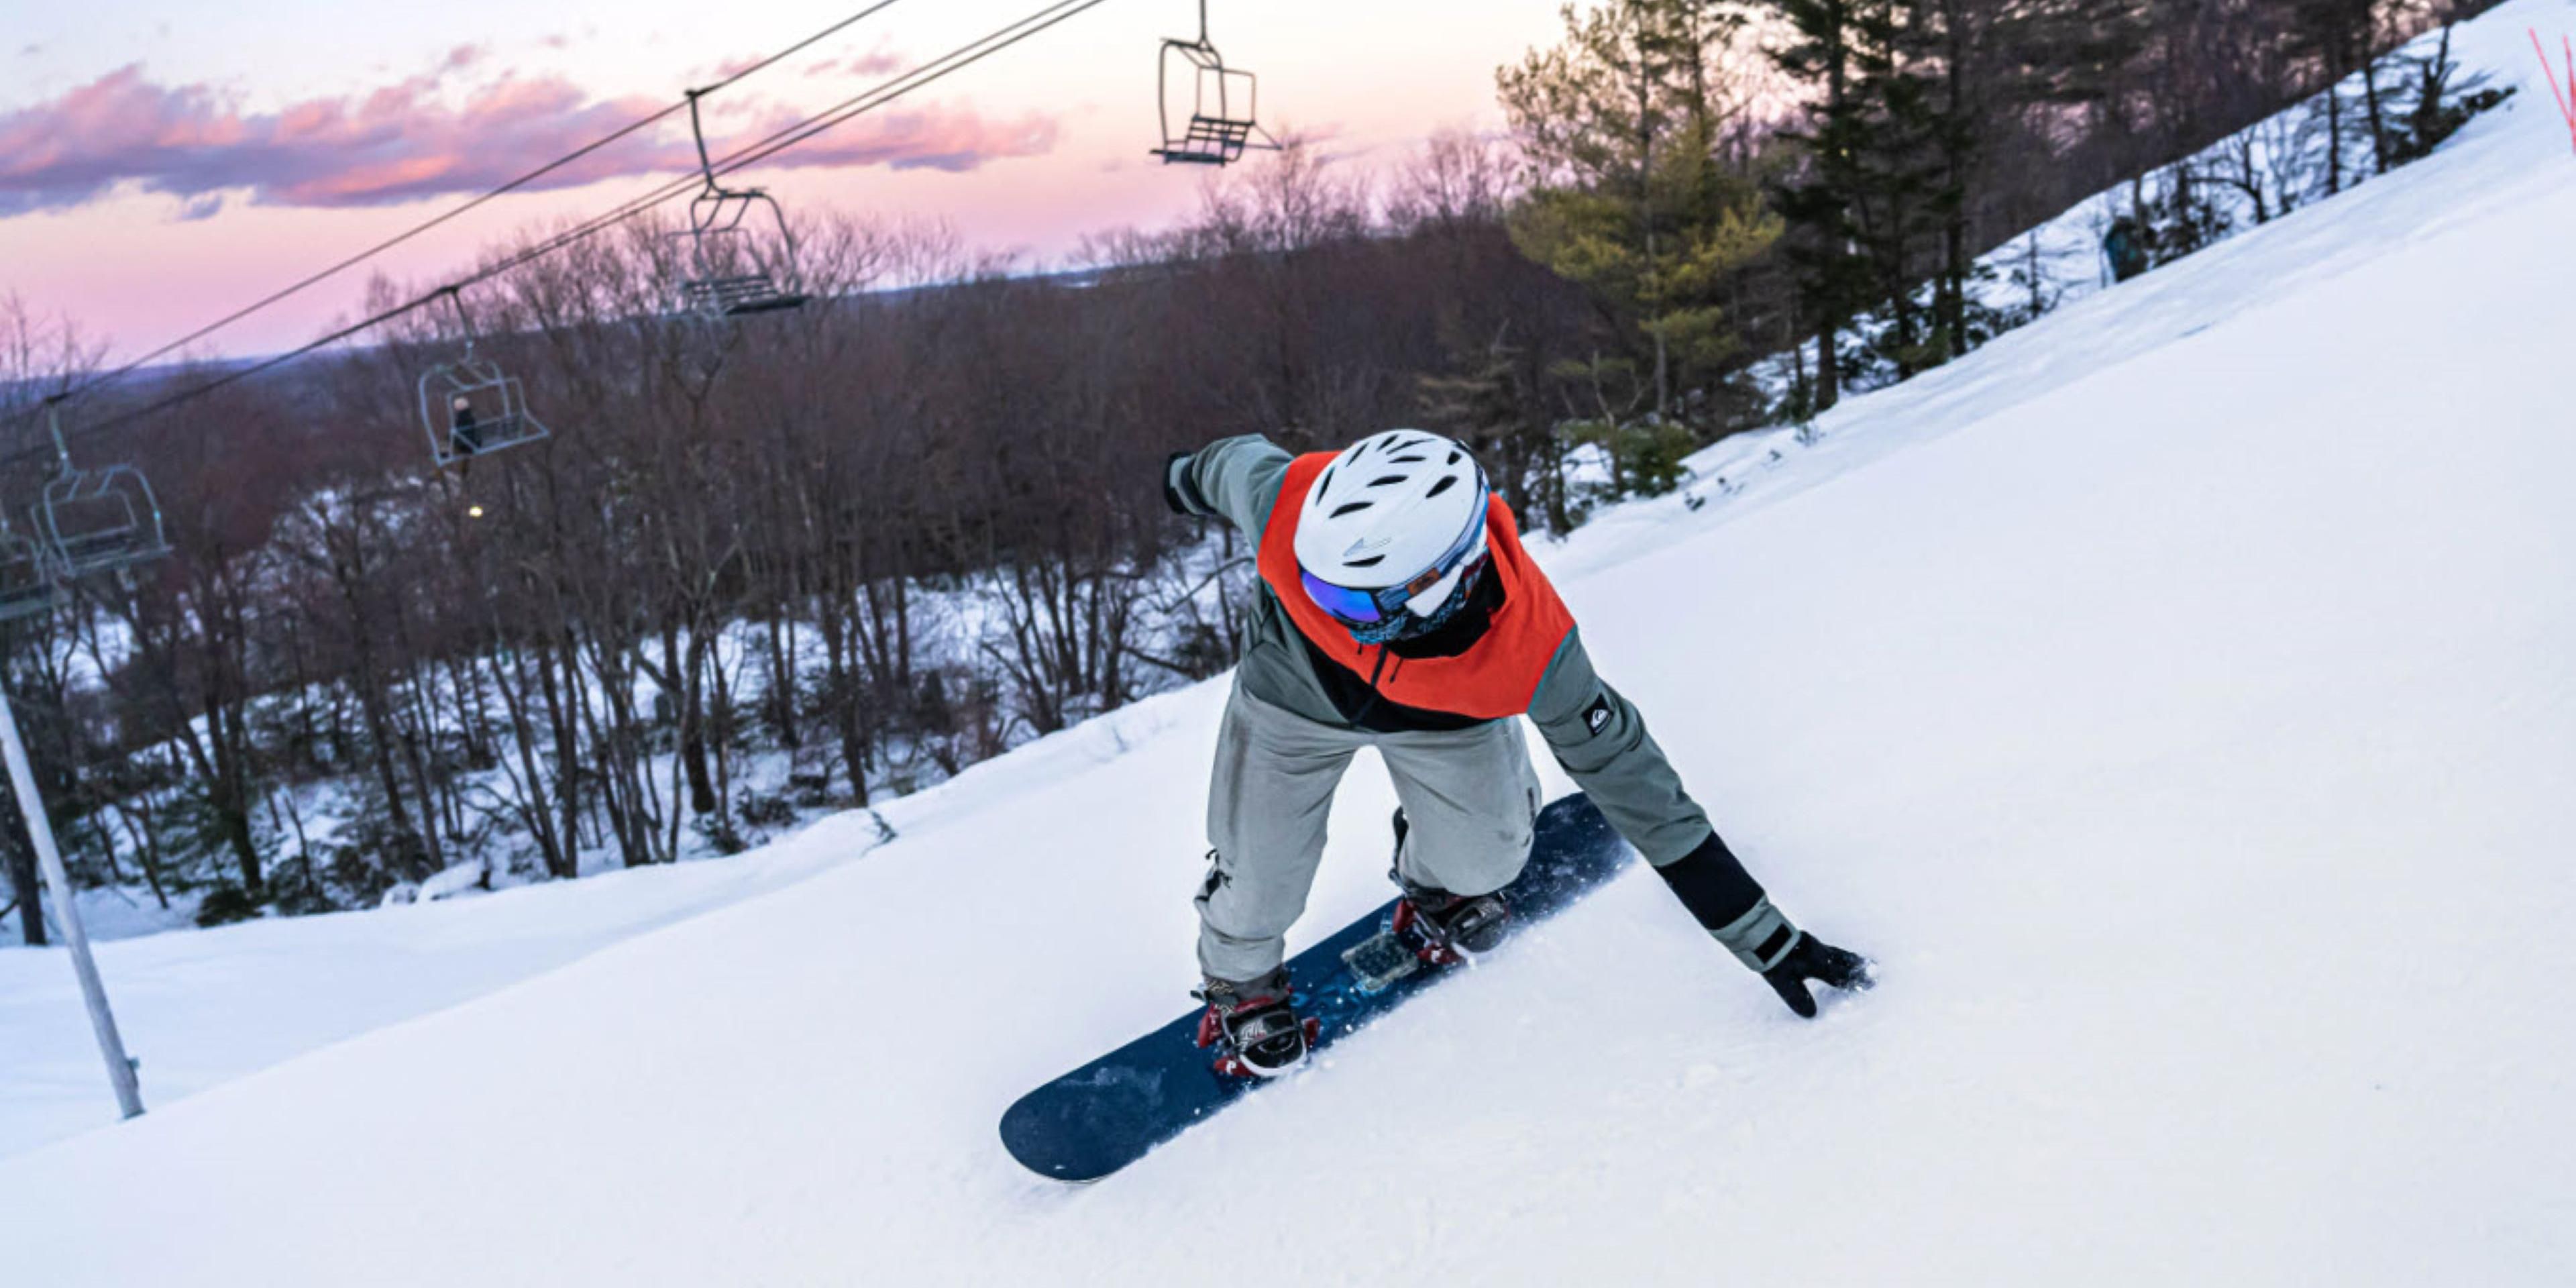 Learning to ski or snowboard should be a fun experience for kids. Start their day out right with a nutritious breakfast for energy, and try not to be in a hurry. Allow at least an hour before lesson time to purchase lift/lesson tickets, and rental equipment.